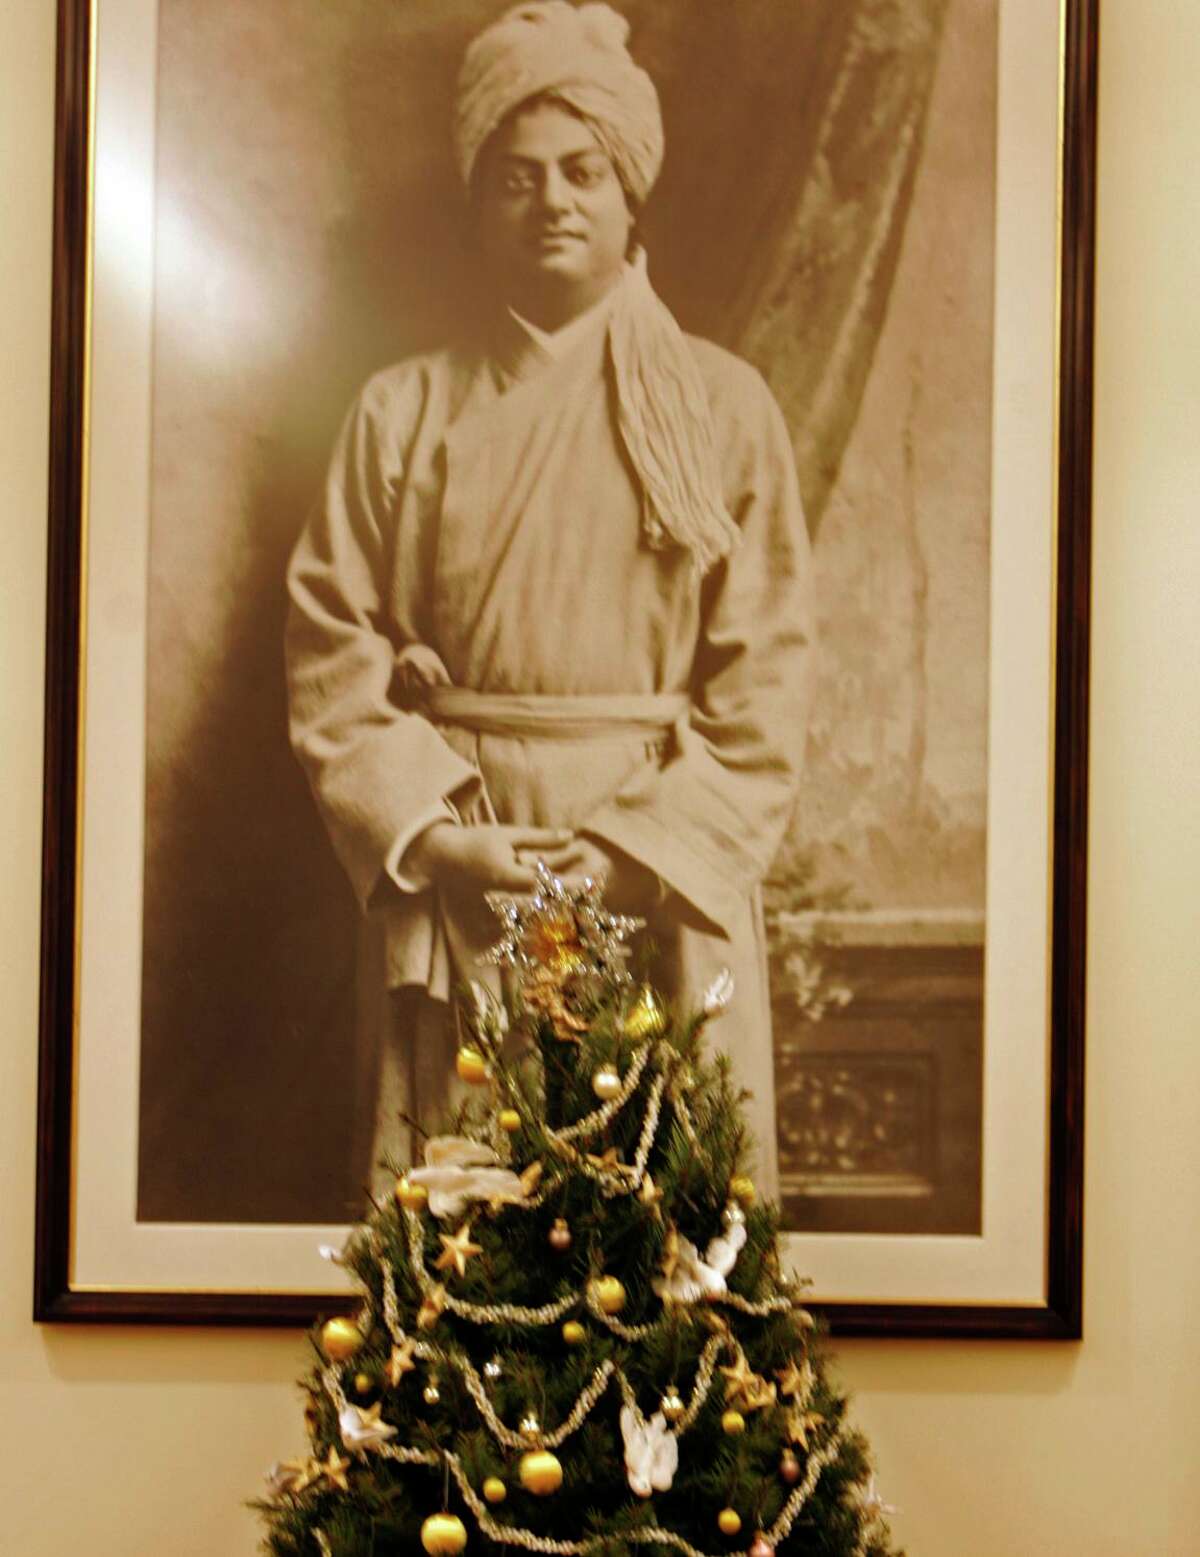 A photograph of Swami Vivekananda hangs behind a Christmas tree in 2005 at the Vedanta Society temple on Vallejo Street.